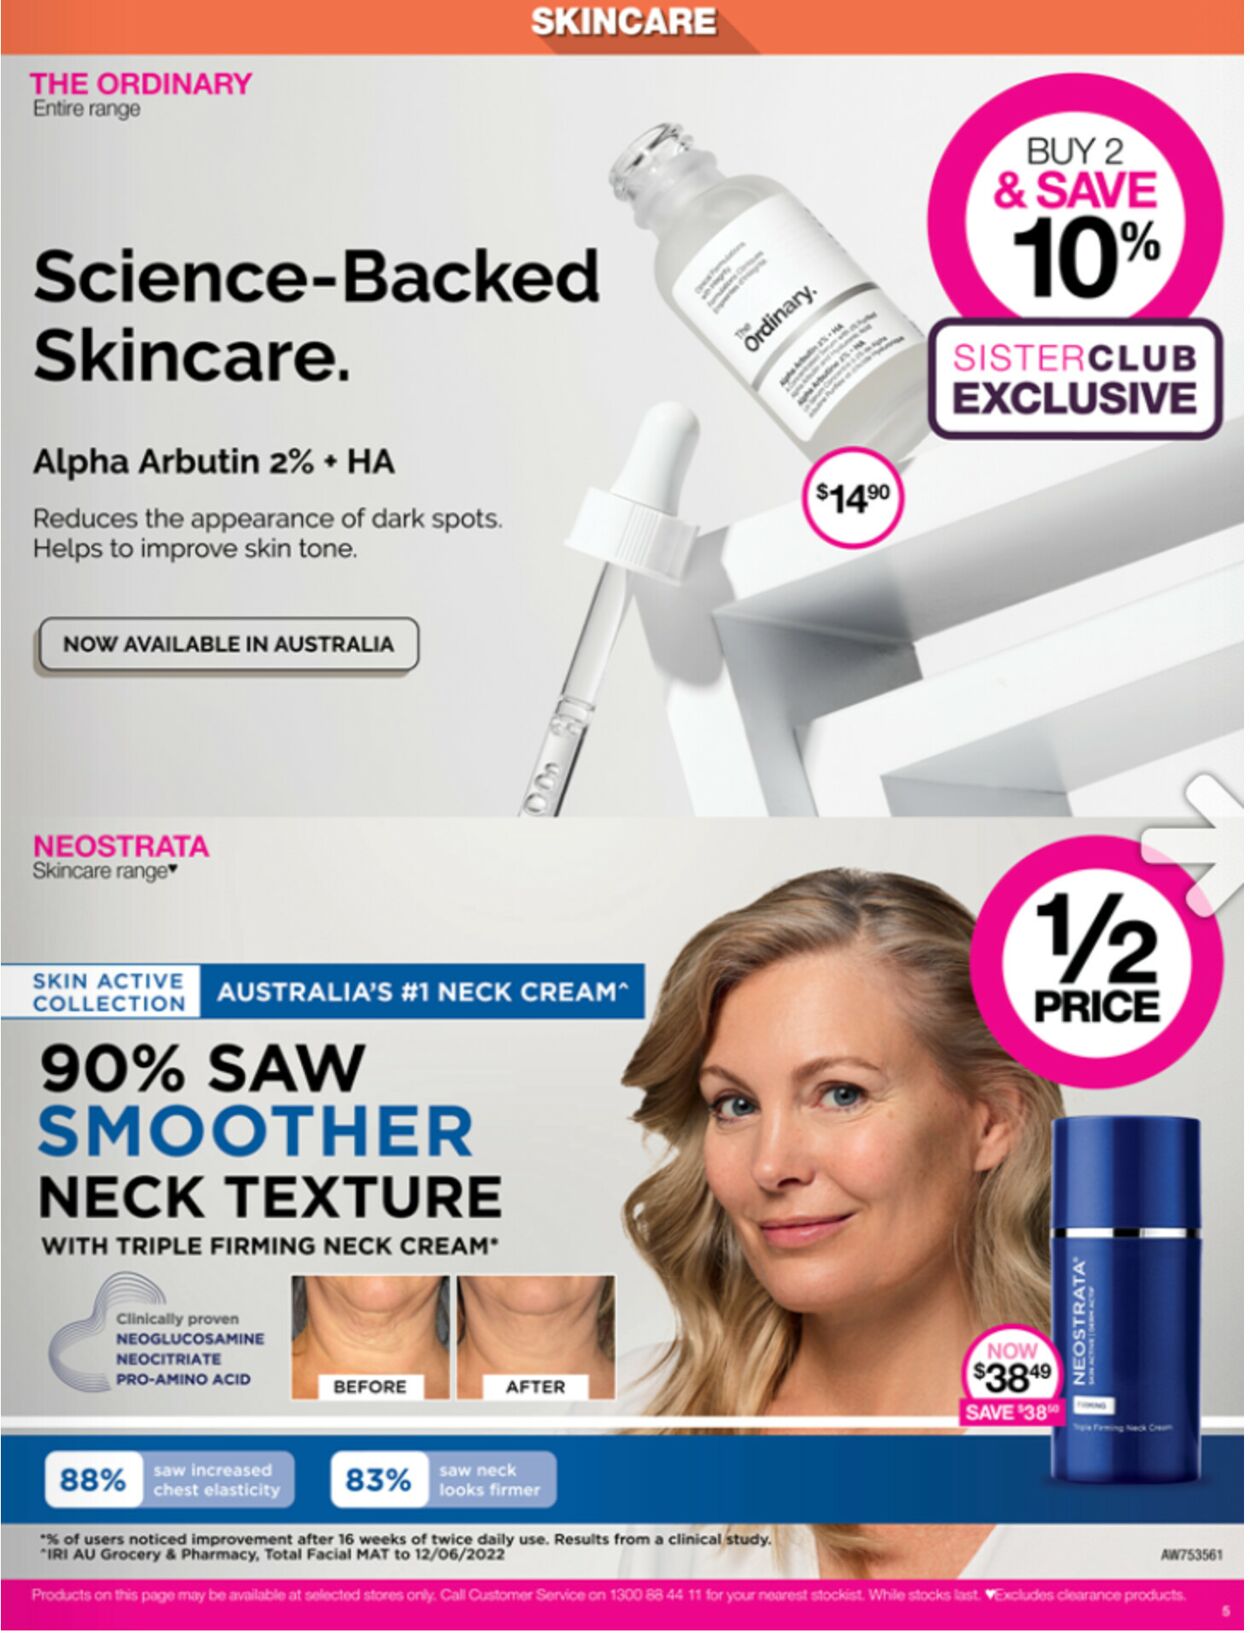 Priceline Pharmacy Catalogue from 08/09/2022